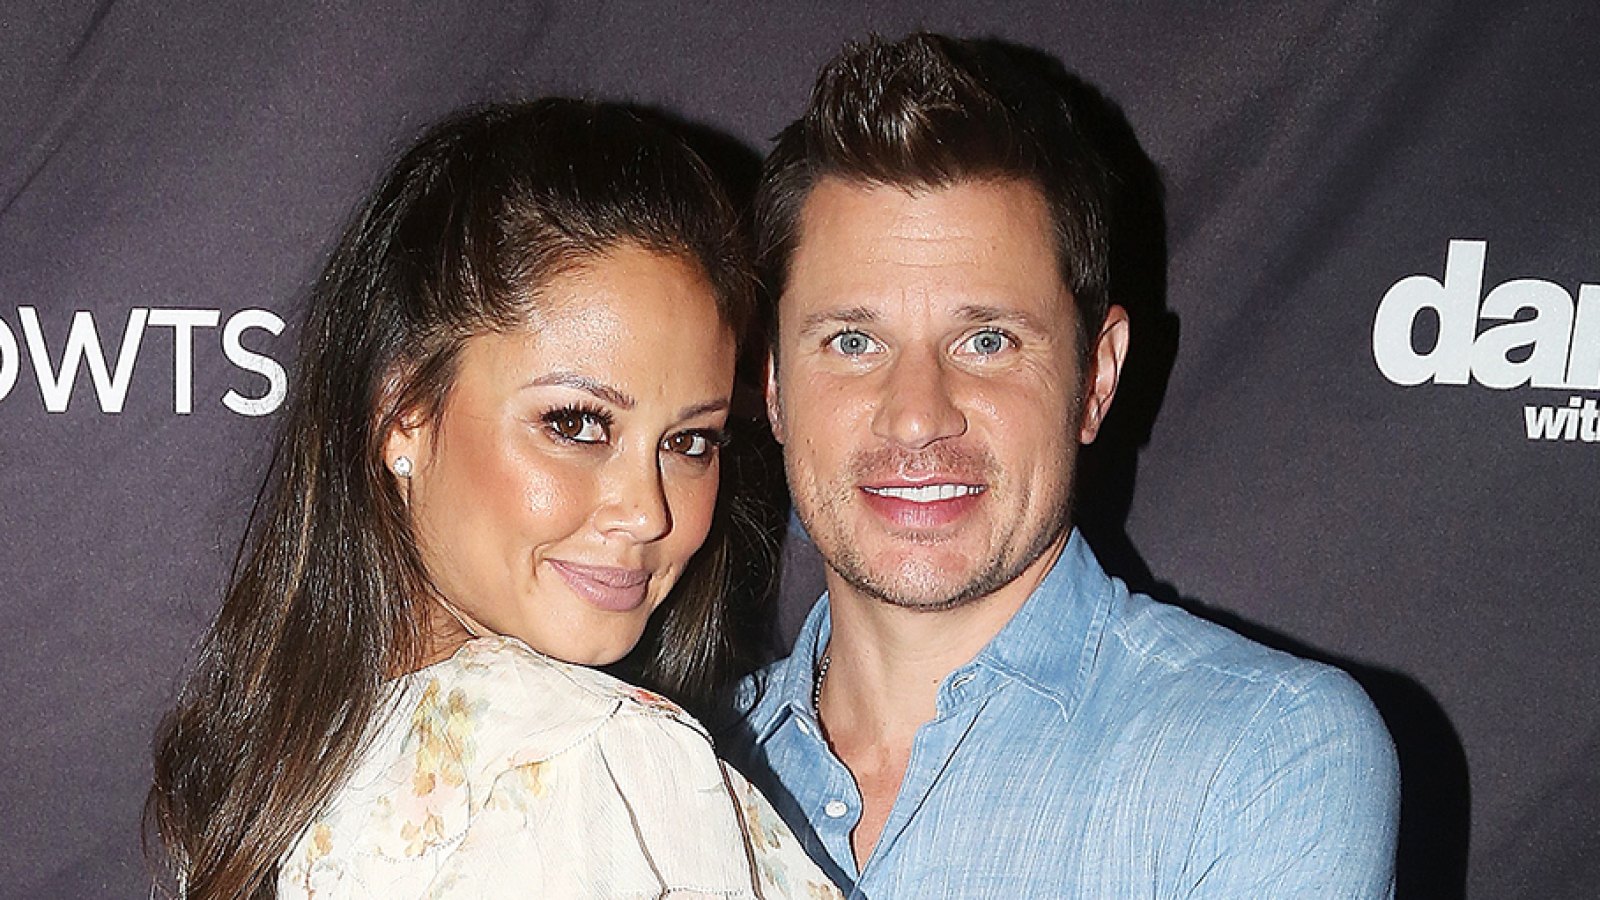 Vanessa Lachey Nick Lachey Dancing With The Stars DWTS